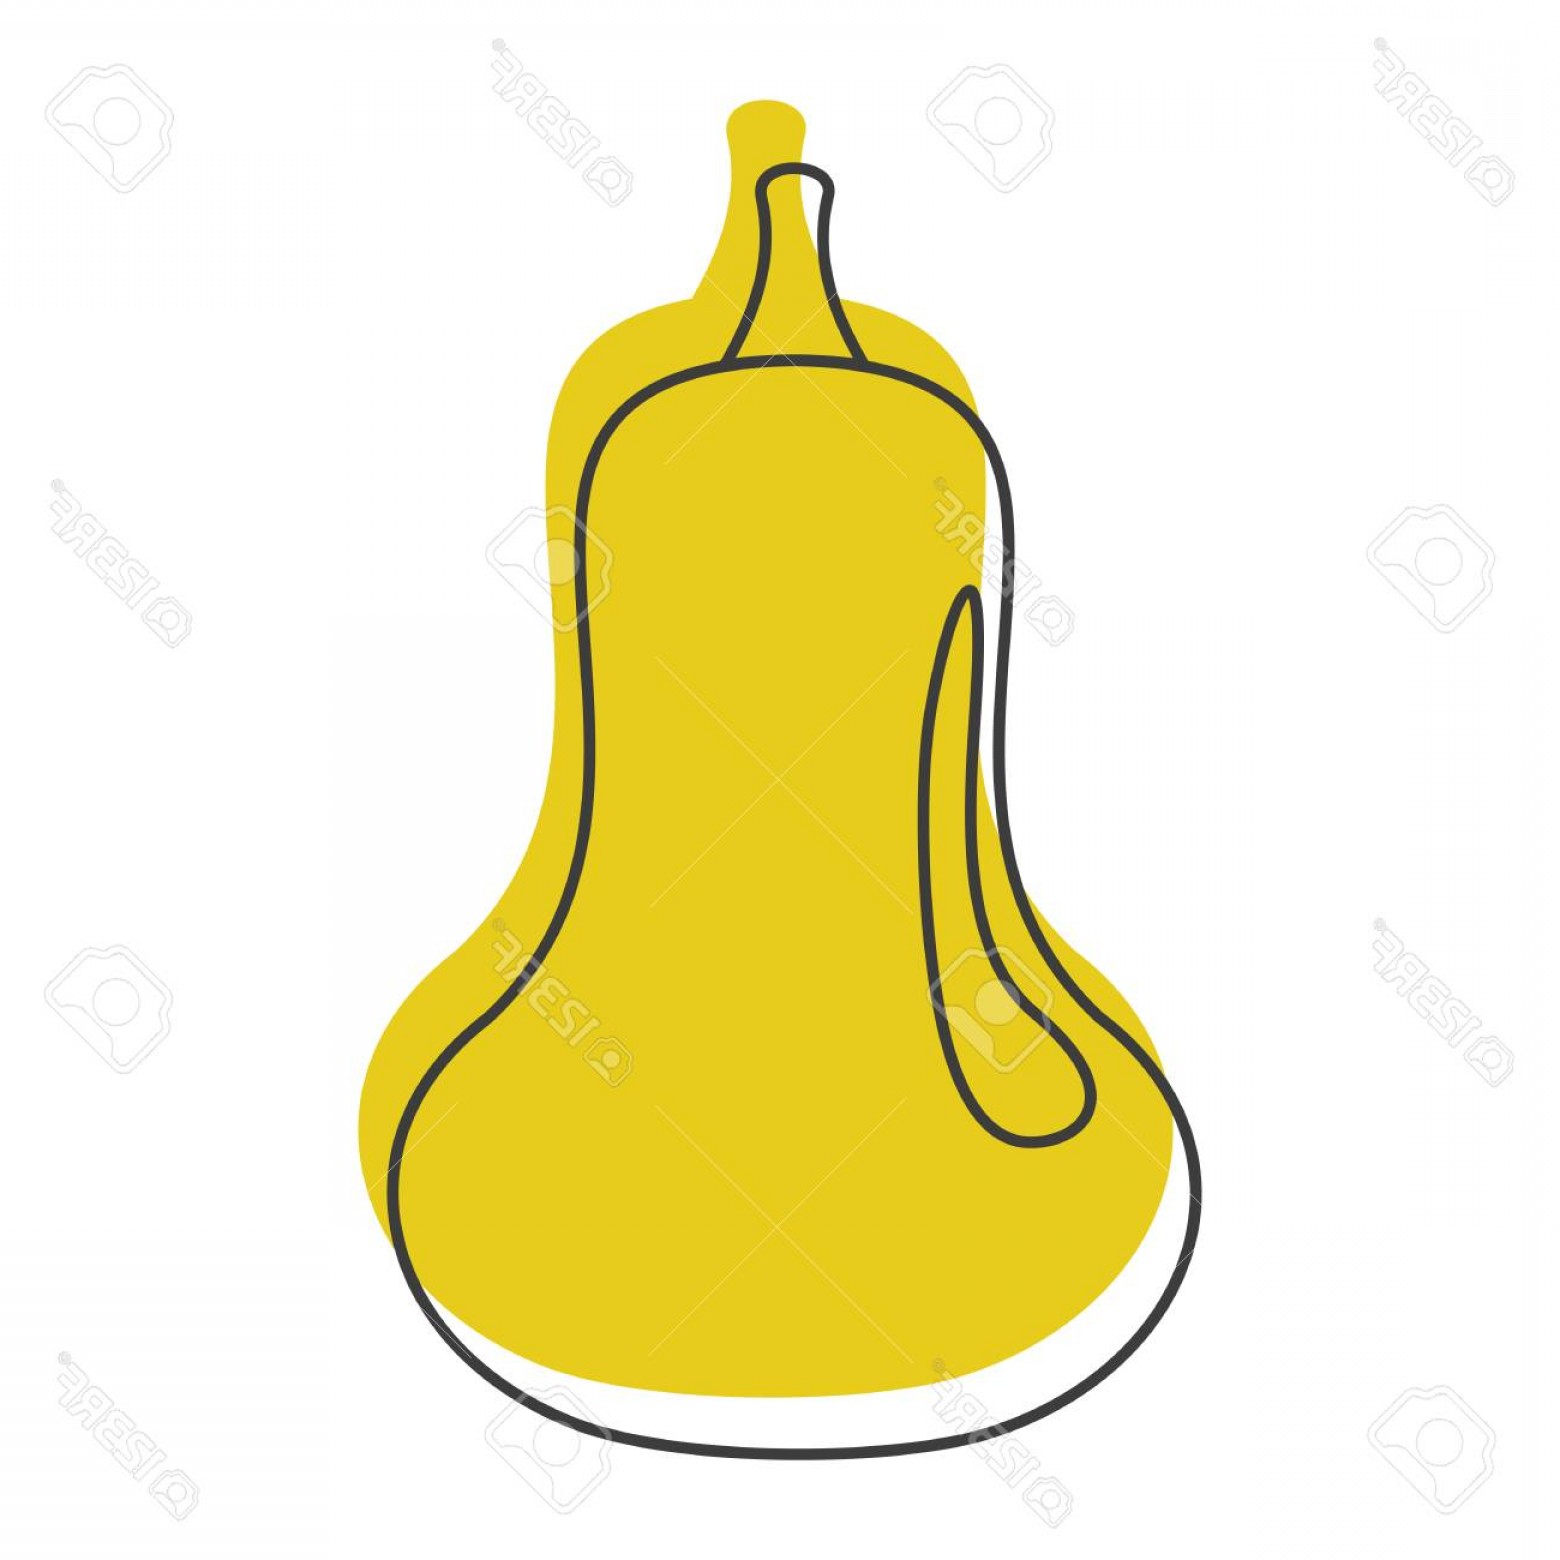 The best free Squash vector images. Download from 28 free vectors of